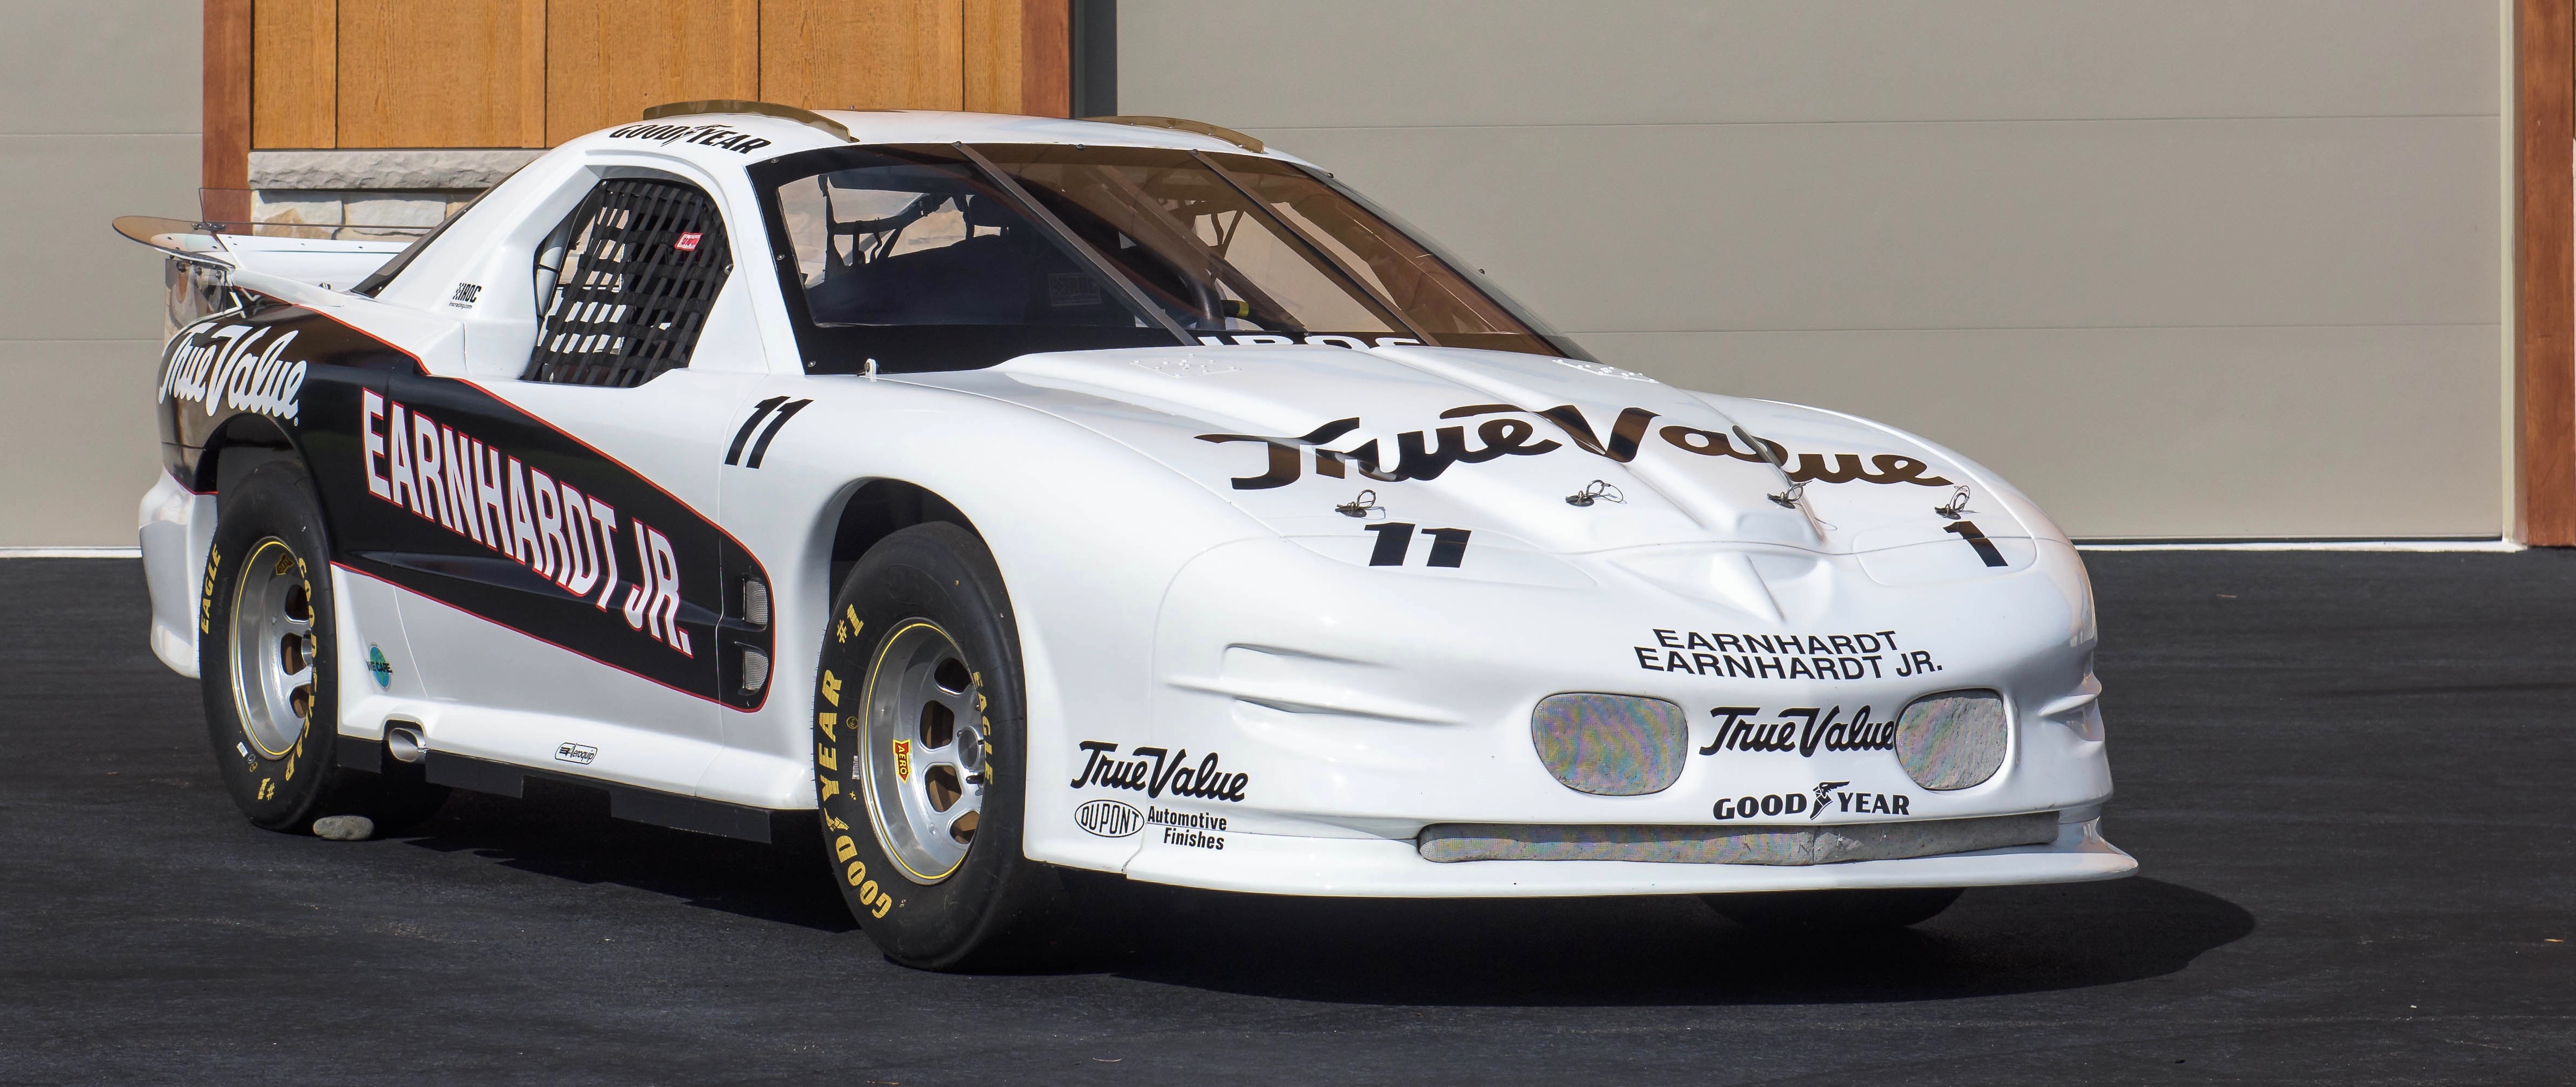 Mecum's Kissimmee auction features IROC racing cars | ClassicCars.com